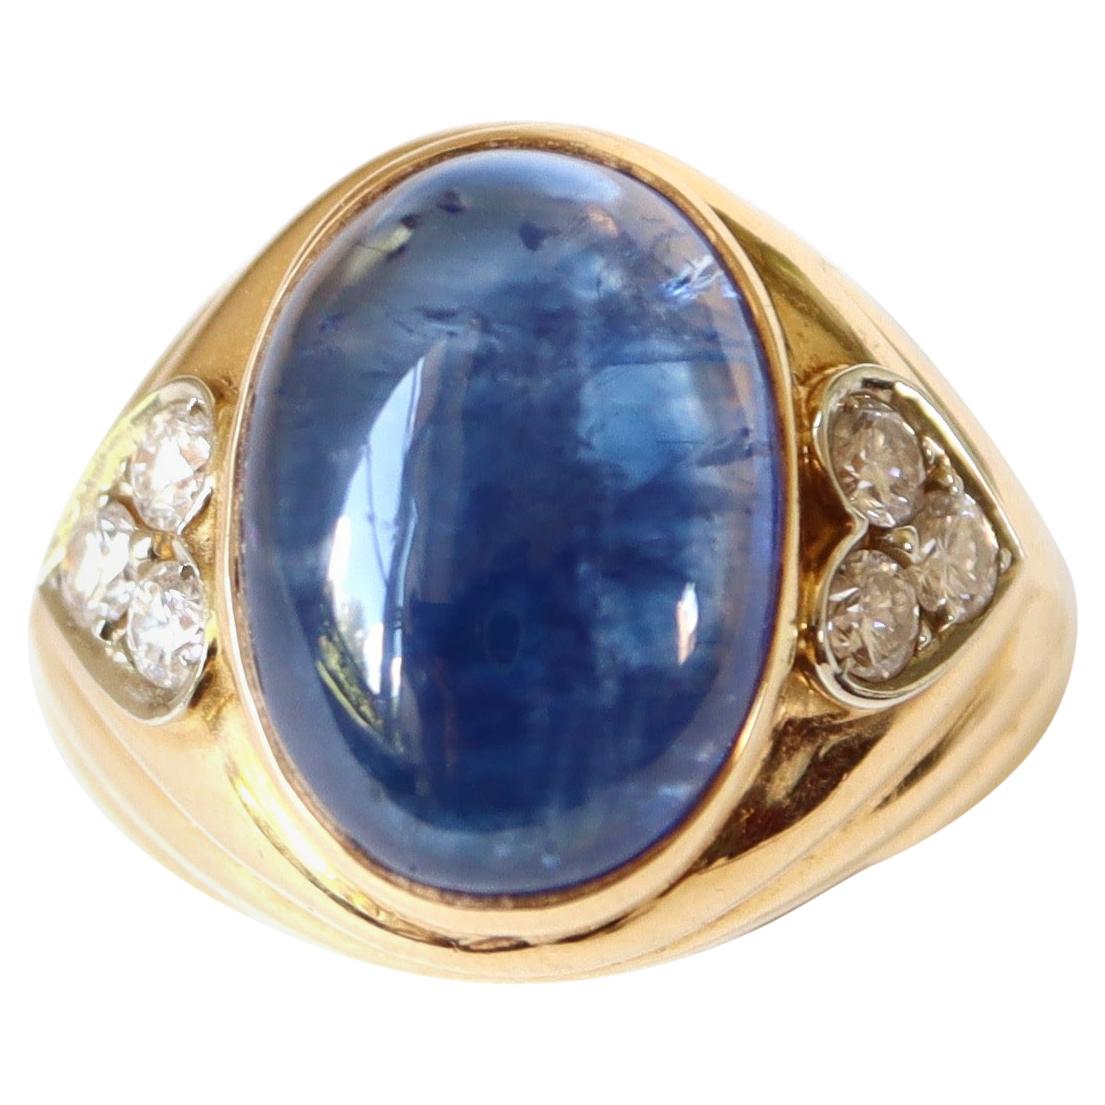 REPOSSI 18 kt yellow gold gadrooned ring set with a large cabochon sapphire of over 10 carats shouldered on each side with a Heart motif setting 3 diamonds weighing approximately 0.5 carats for the three, for a total of one carat for the